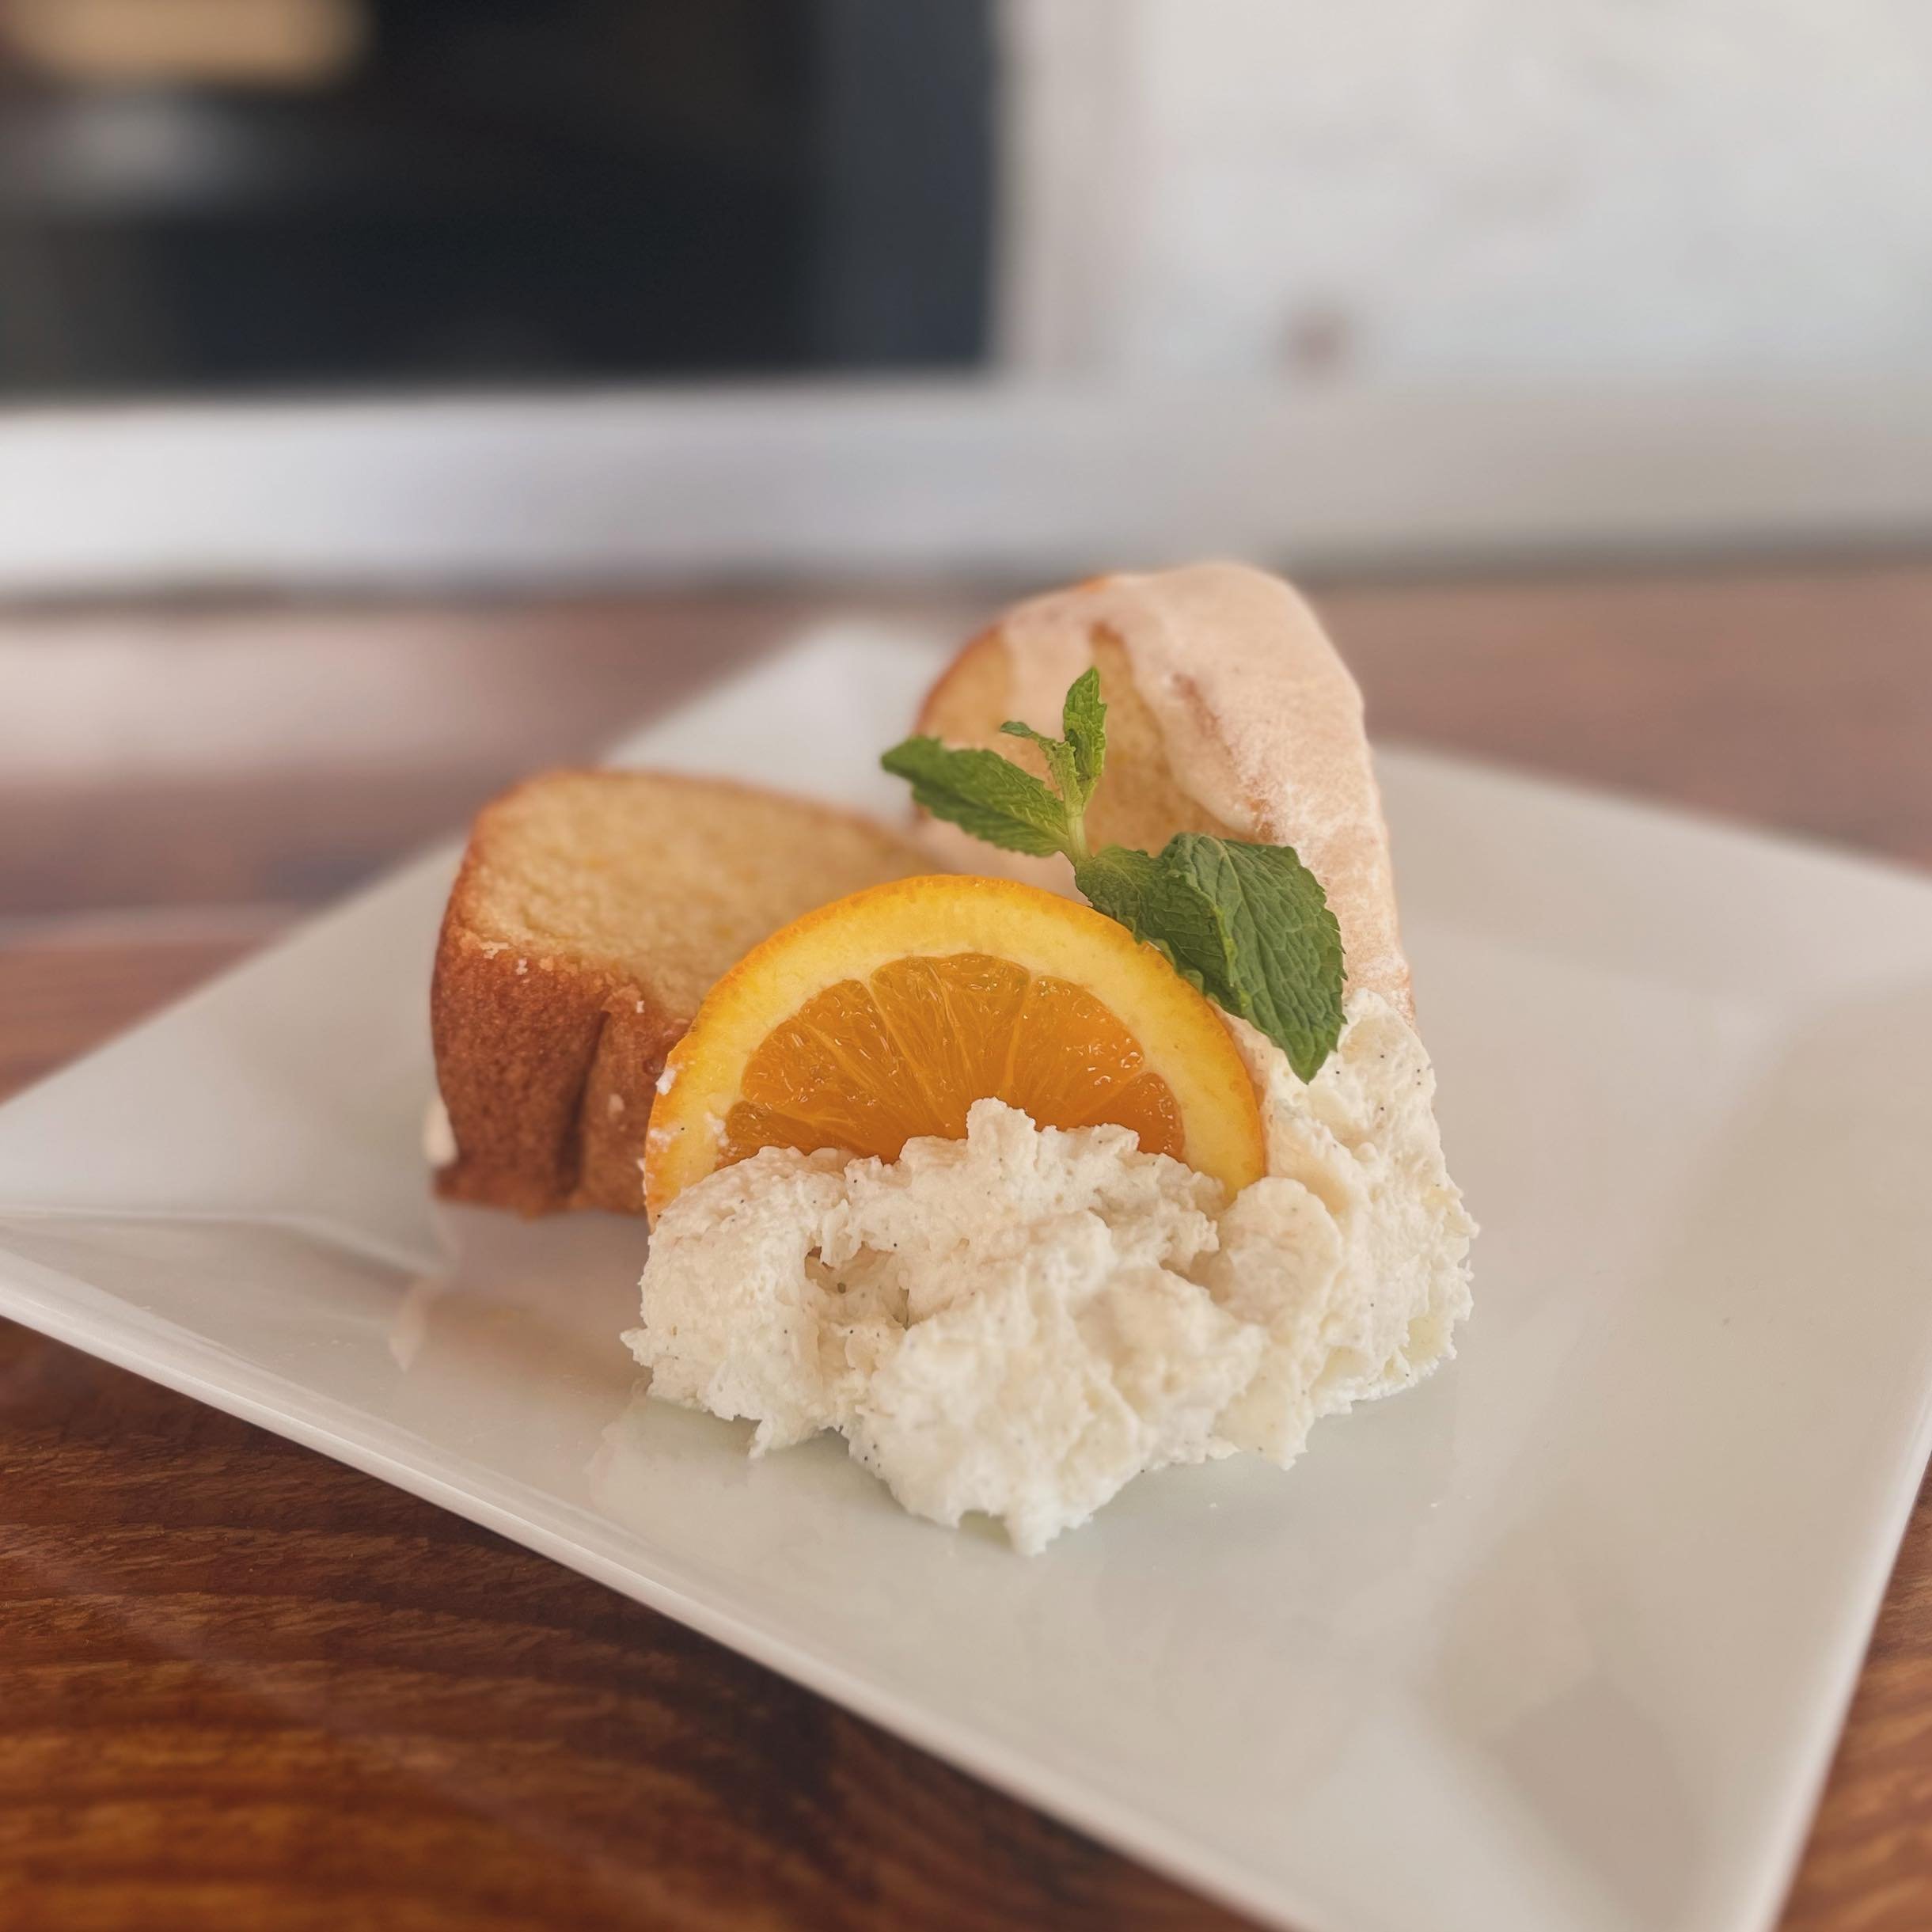 NEW DESSERT: when life gives you oranges 🍊&hellip; you make Orange Fanta Cake with Zested Cream Cheese Frosting and top it up with some fresh whipped cream #oranges #cake #dessert🍰 @whiskgourmet @michellem612